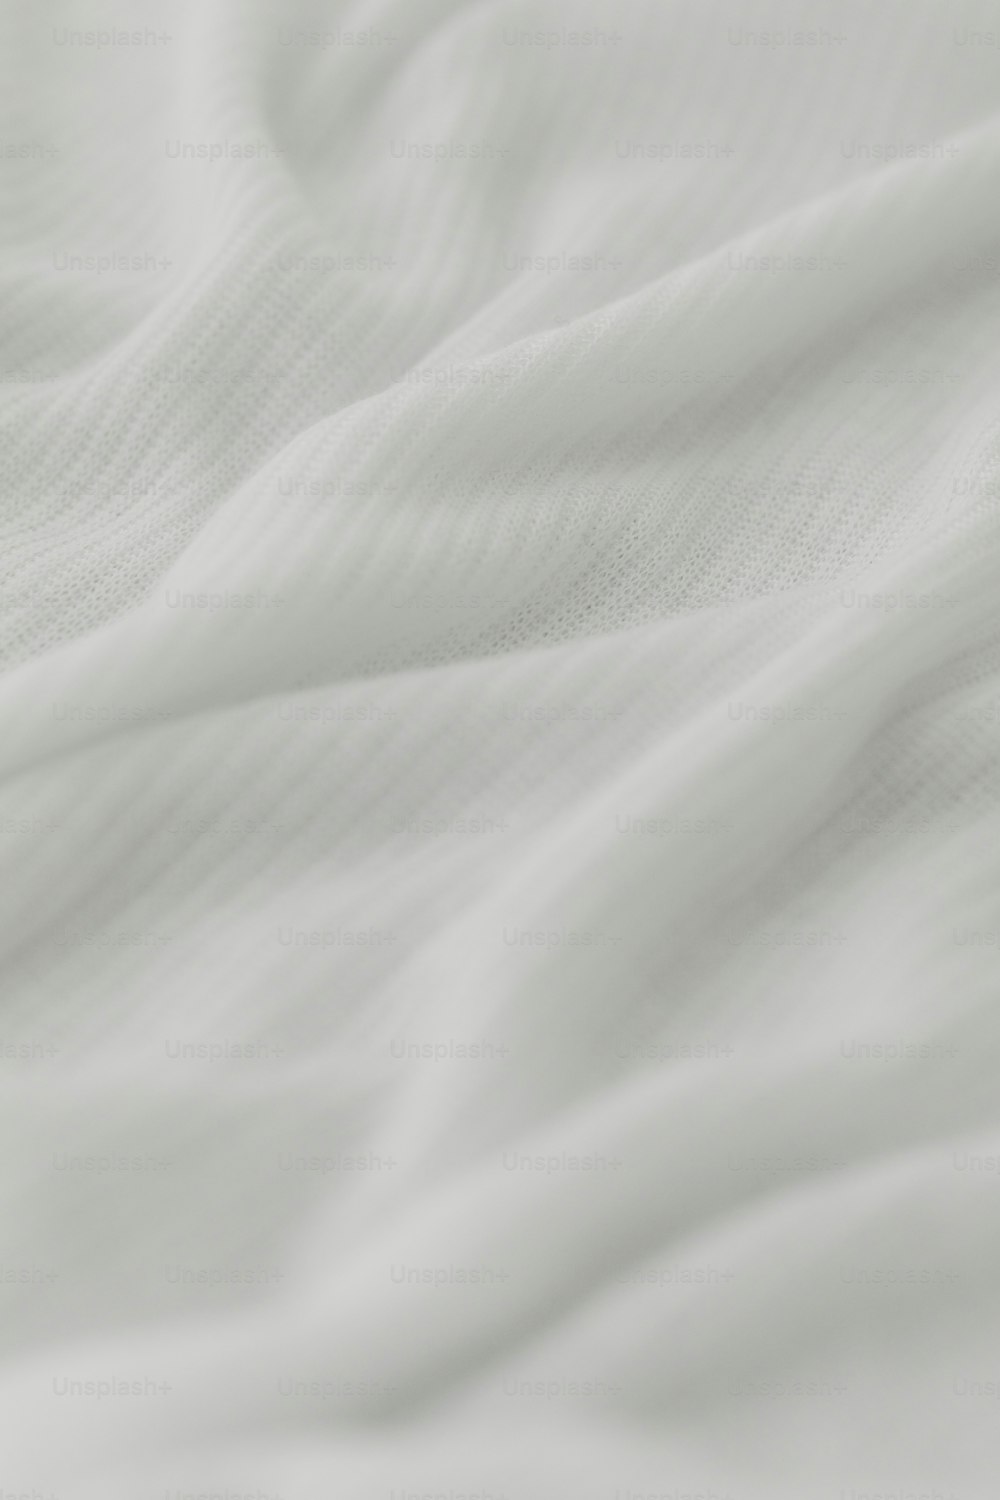 White Fabric Pictures  Download Free Images on Unsplash